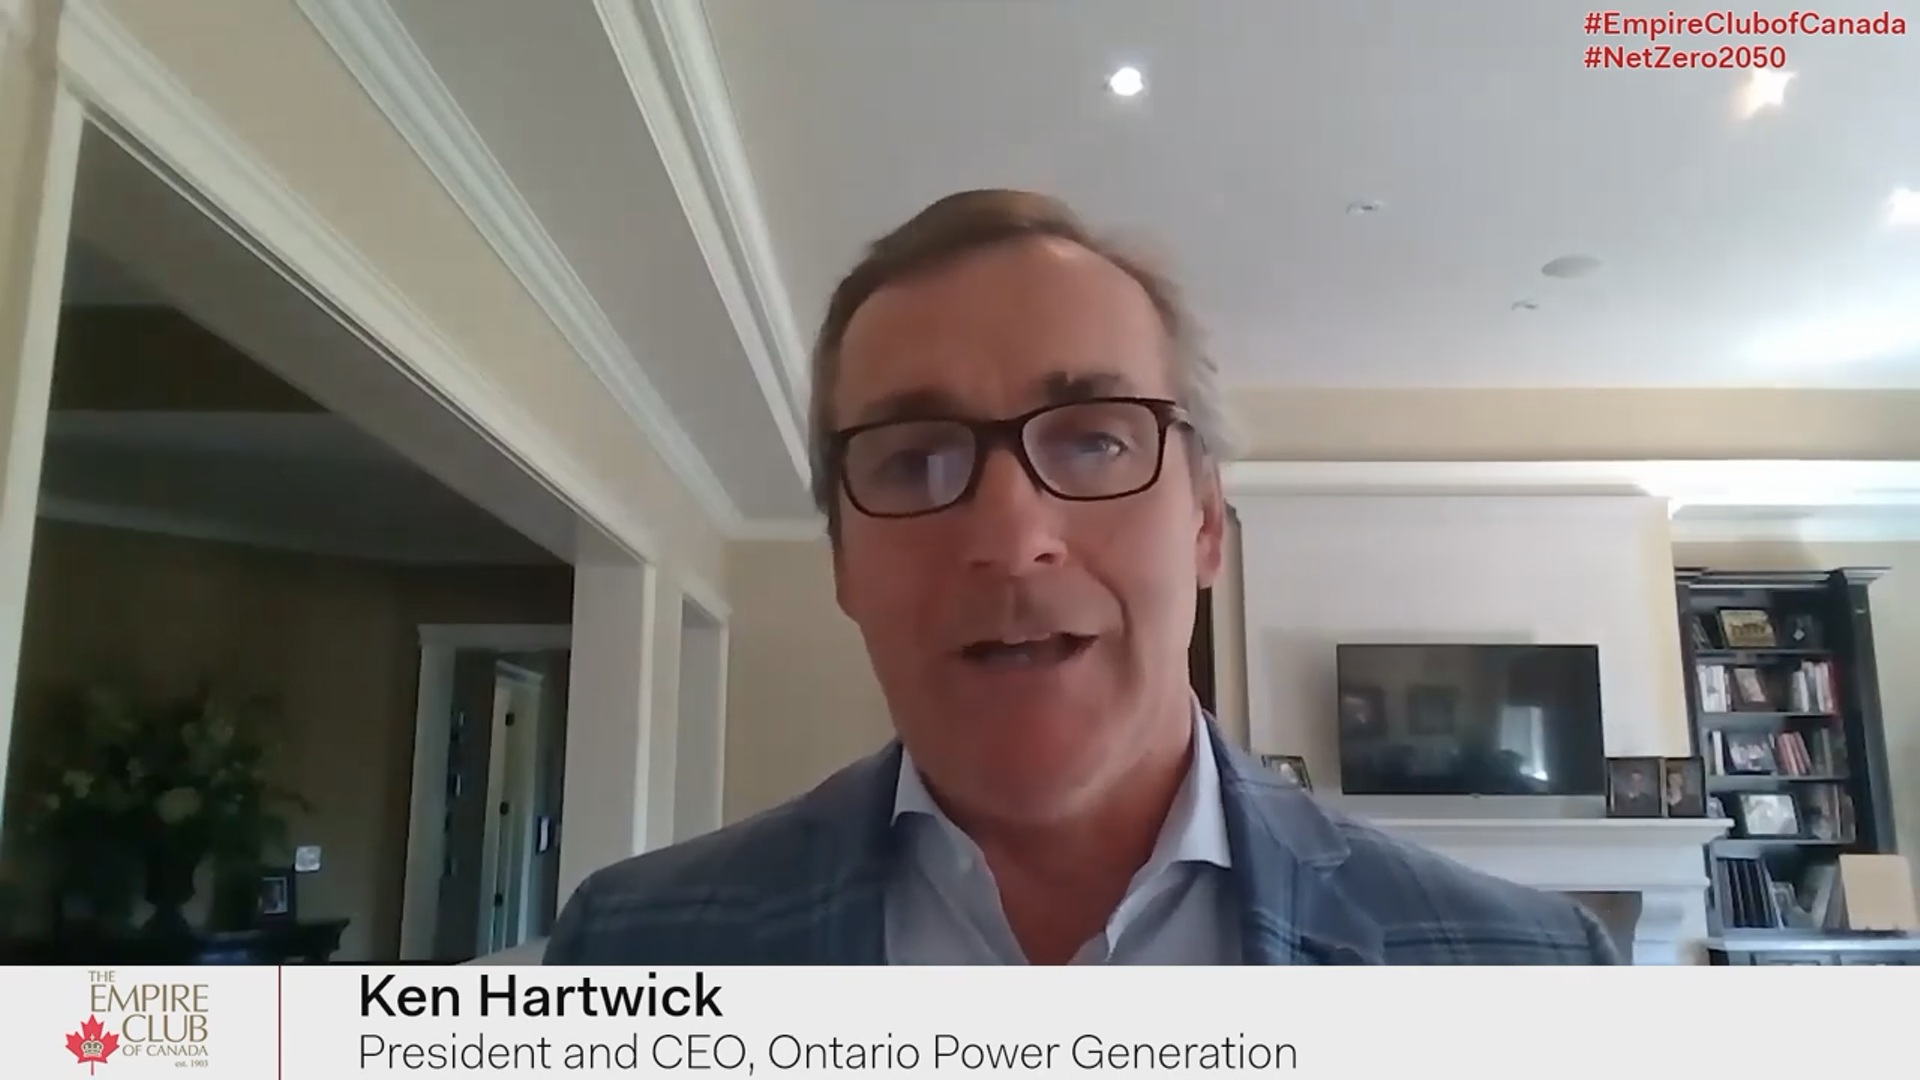 Ken Hartwick, President and CEO, Ontario Power Generation speaking in a virtual event